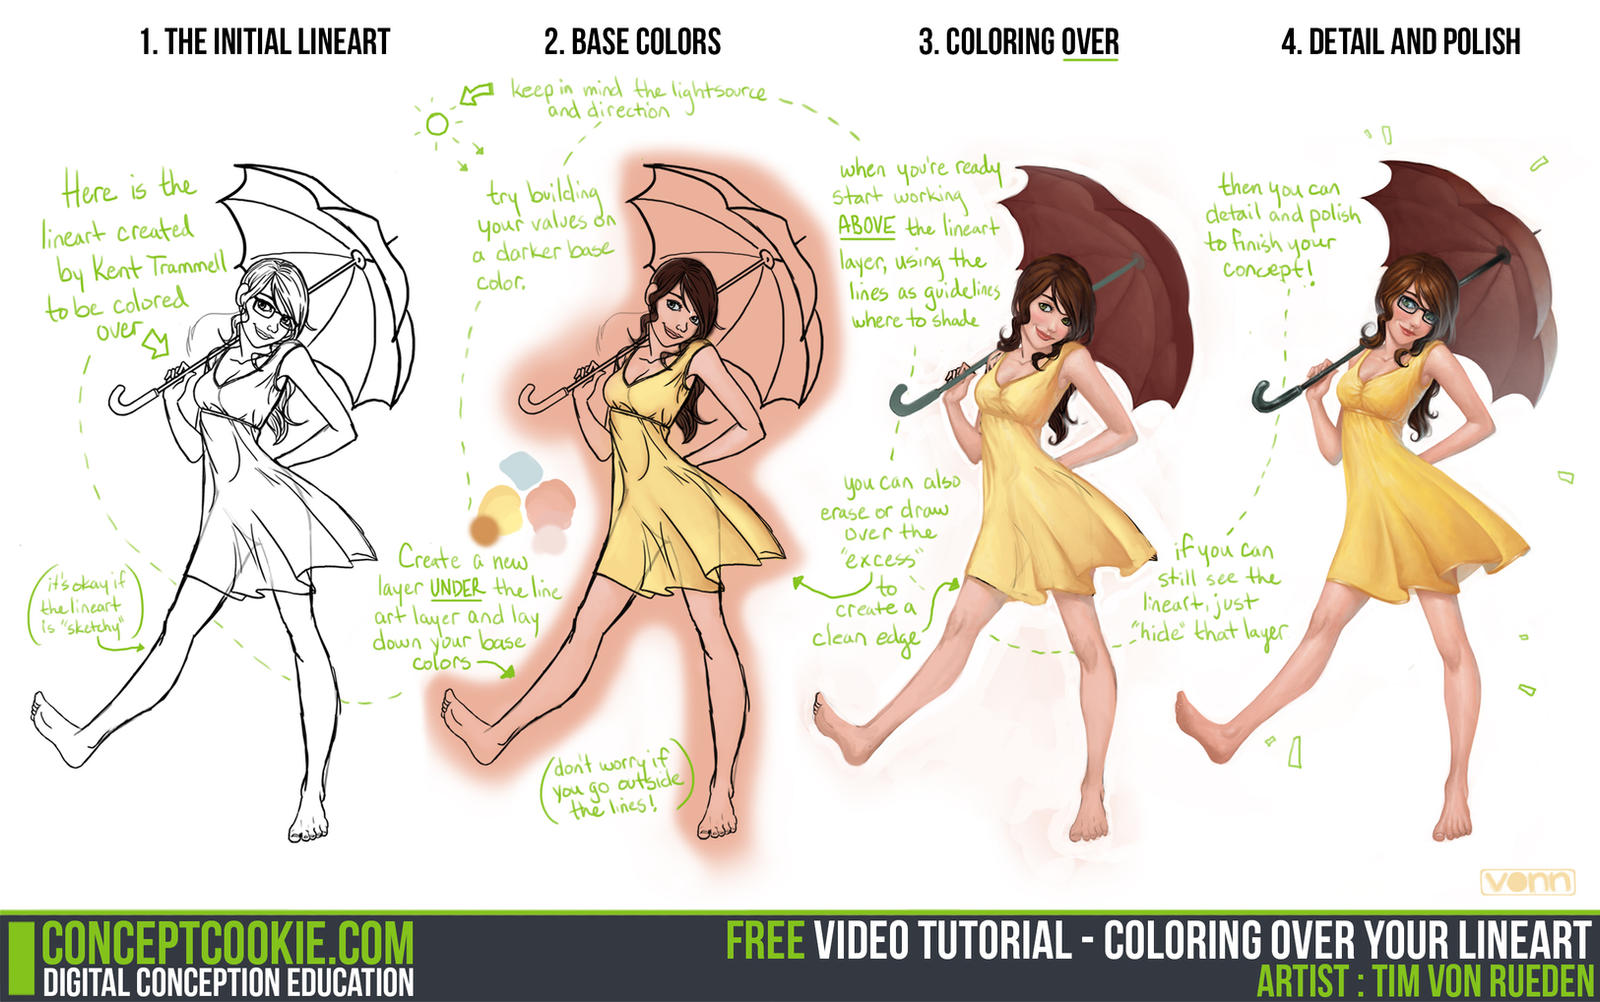 Tutorial: Coloring Over Your Lineart